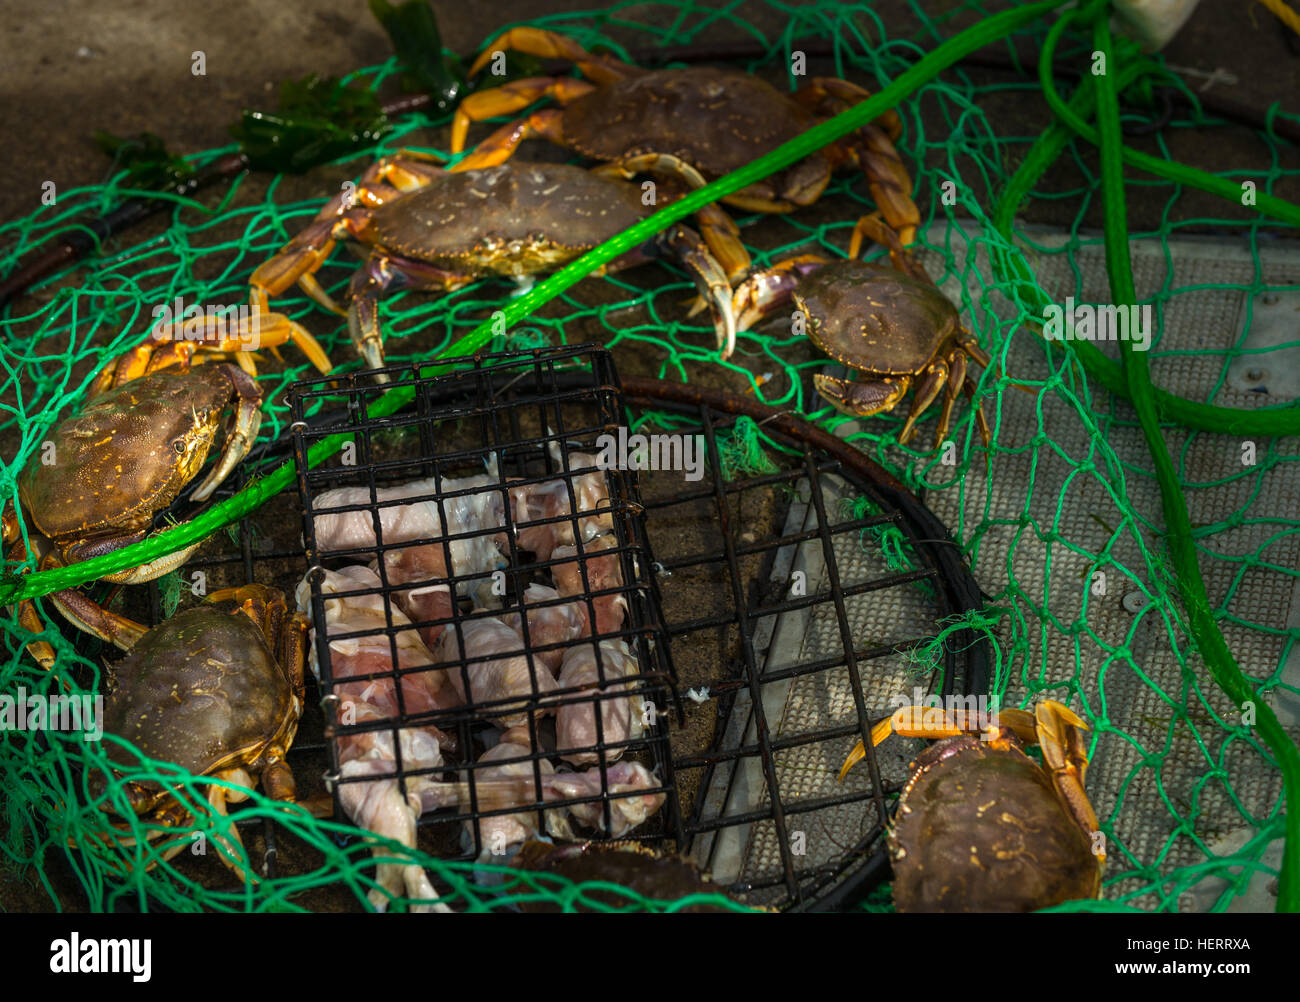 Couple crabs caught in small wire trap Stock Photo